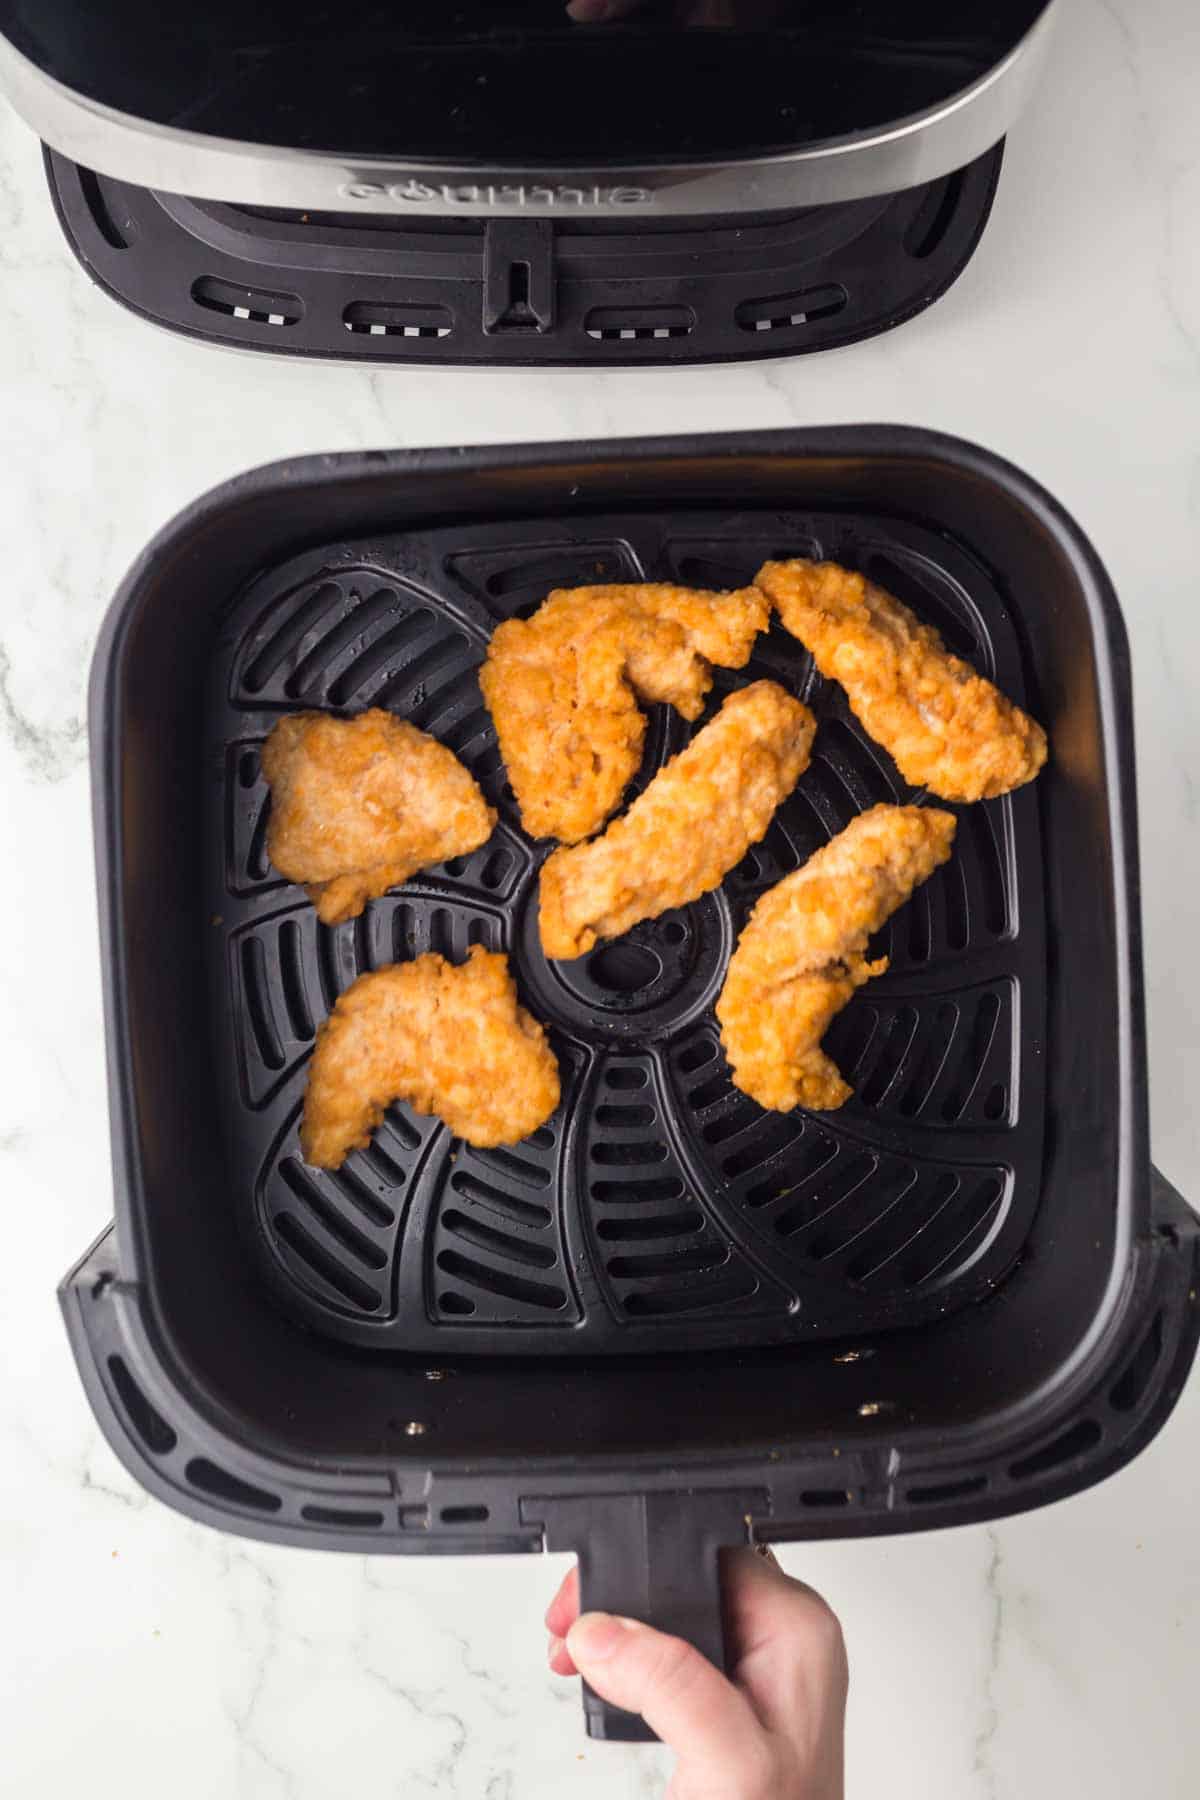 top view of an air fryer basket with with cooked chicken inside